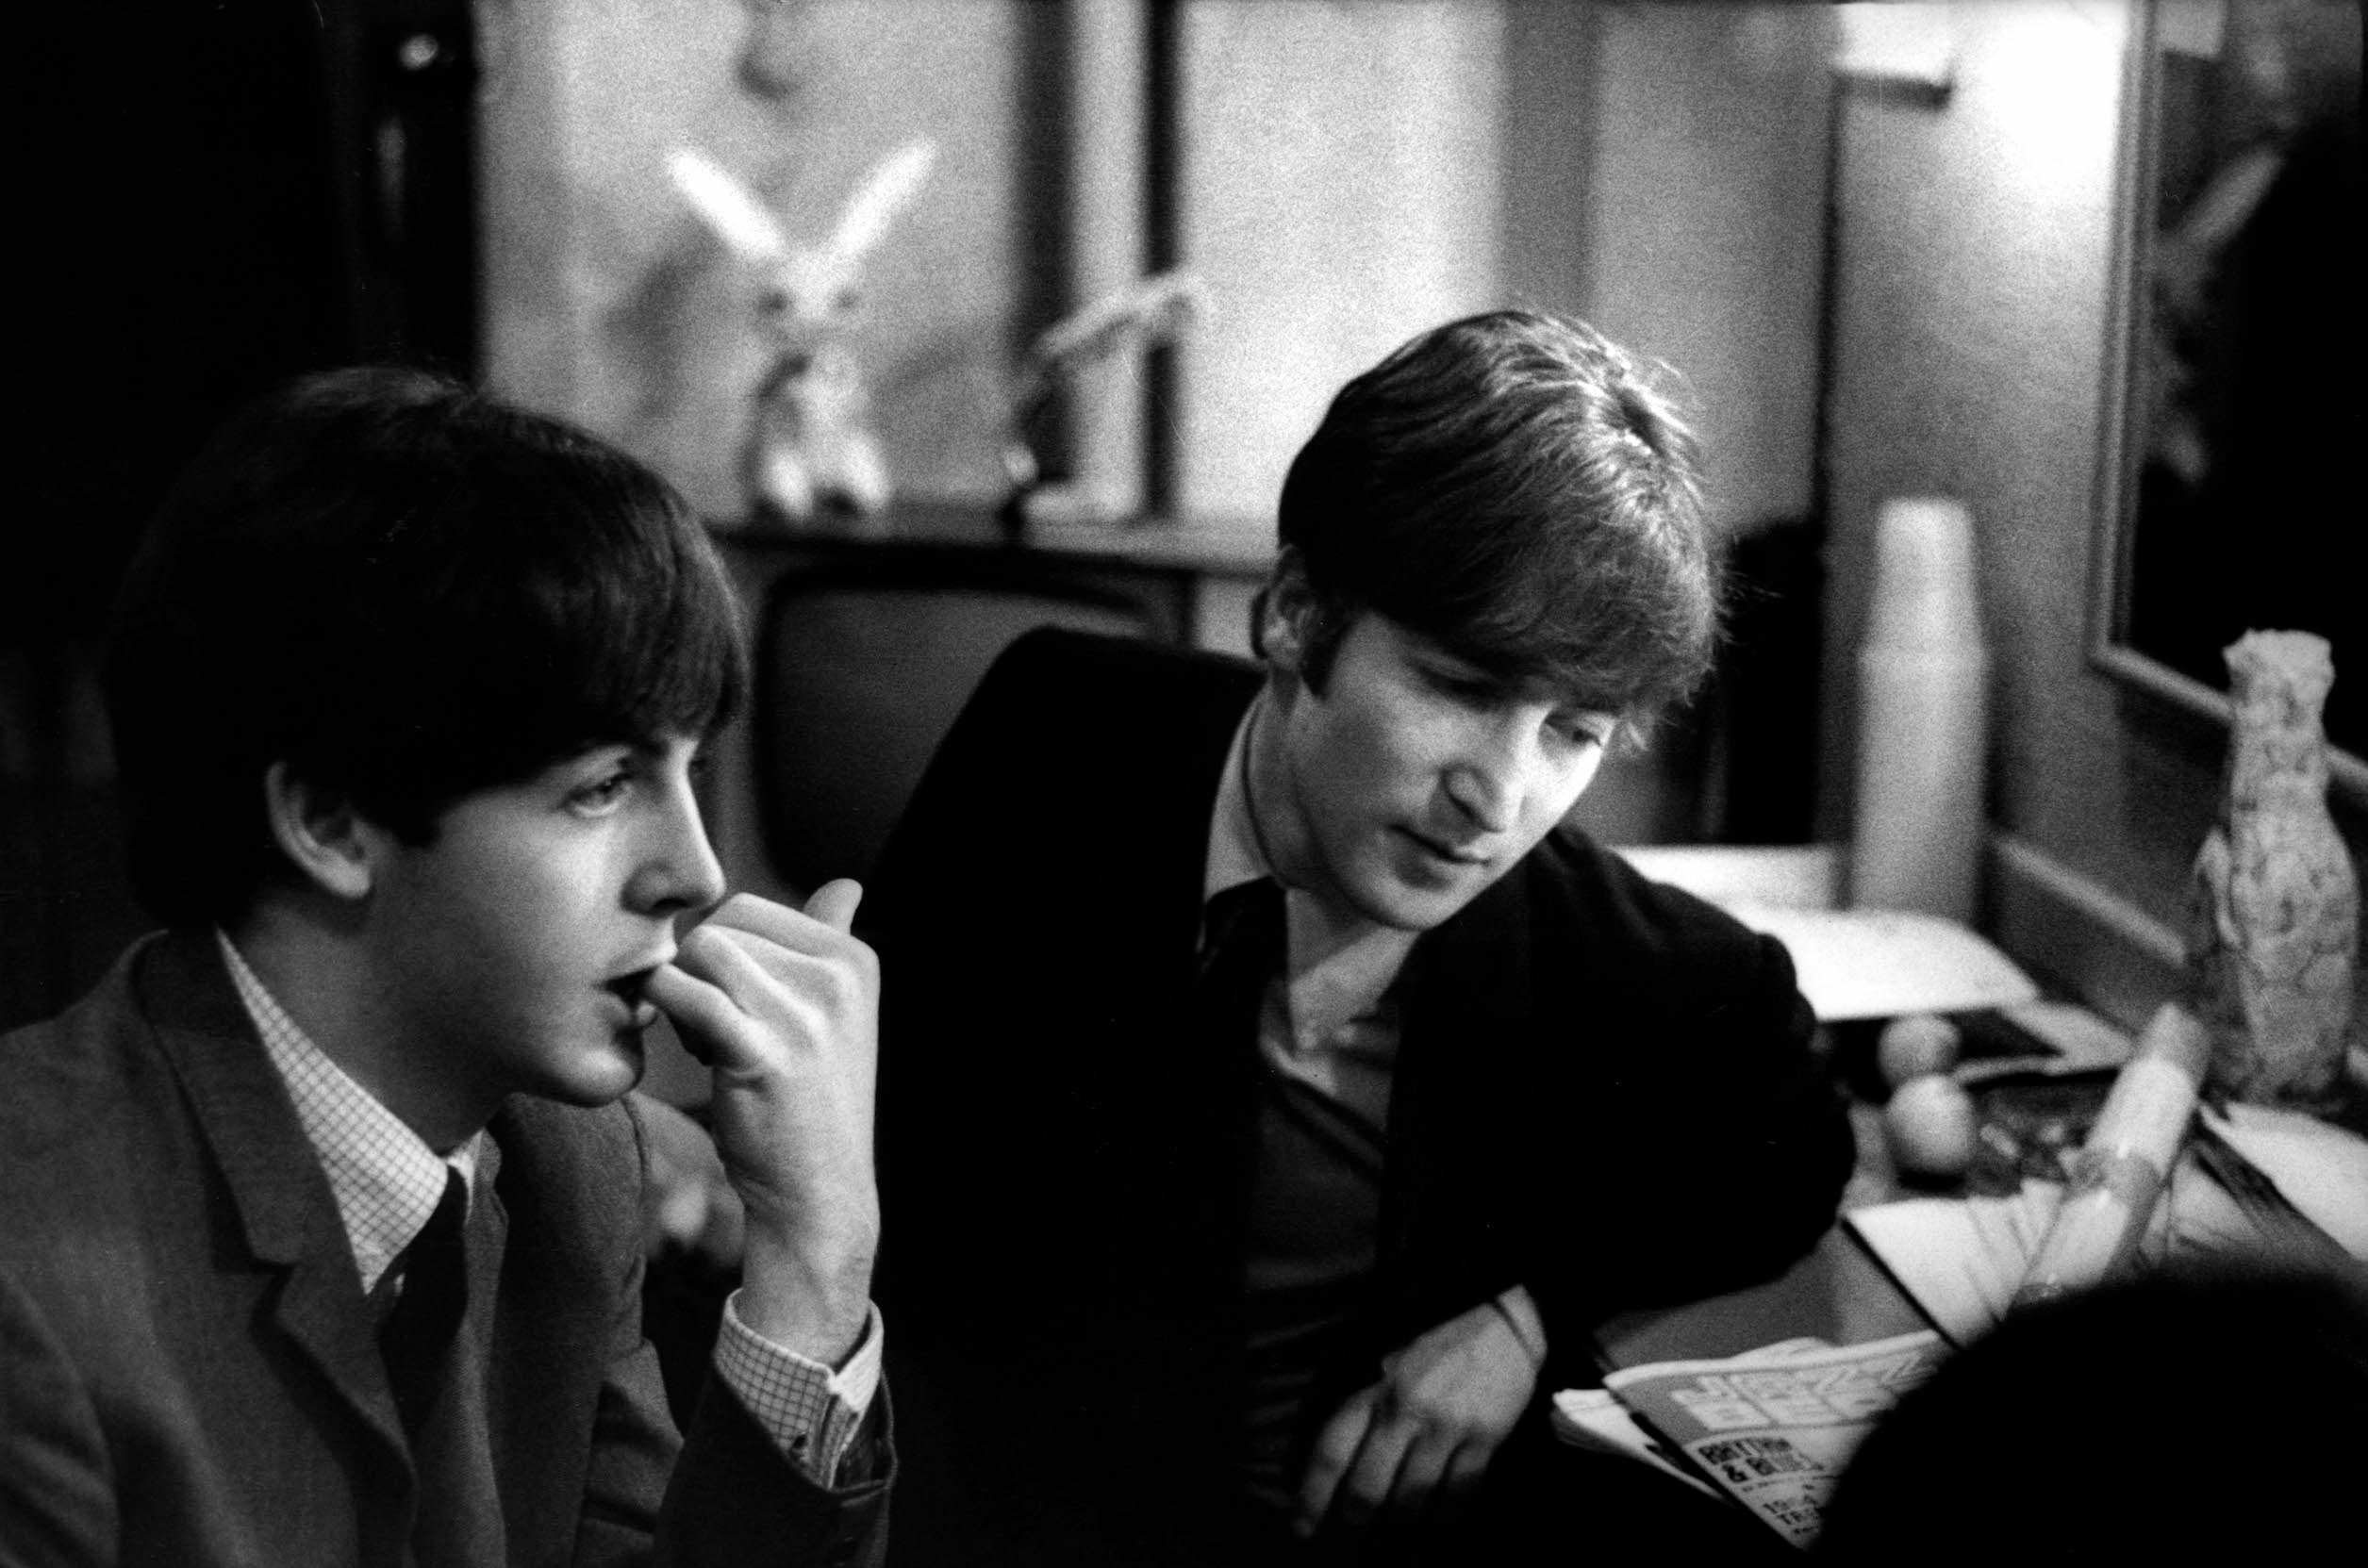 The Beatles Song Paul McCartney Says He and John Lennon Did in 'Waltz Time'